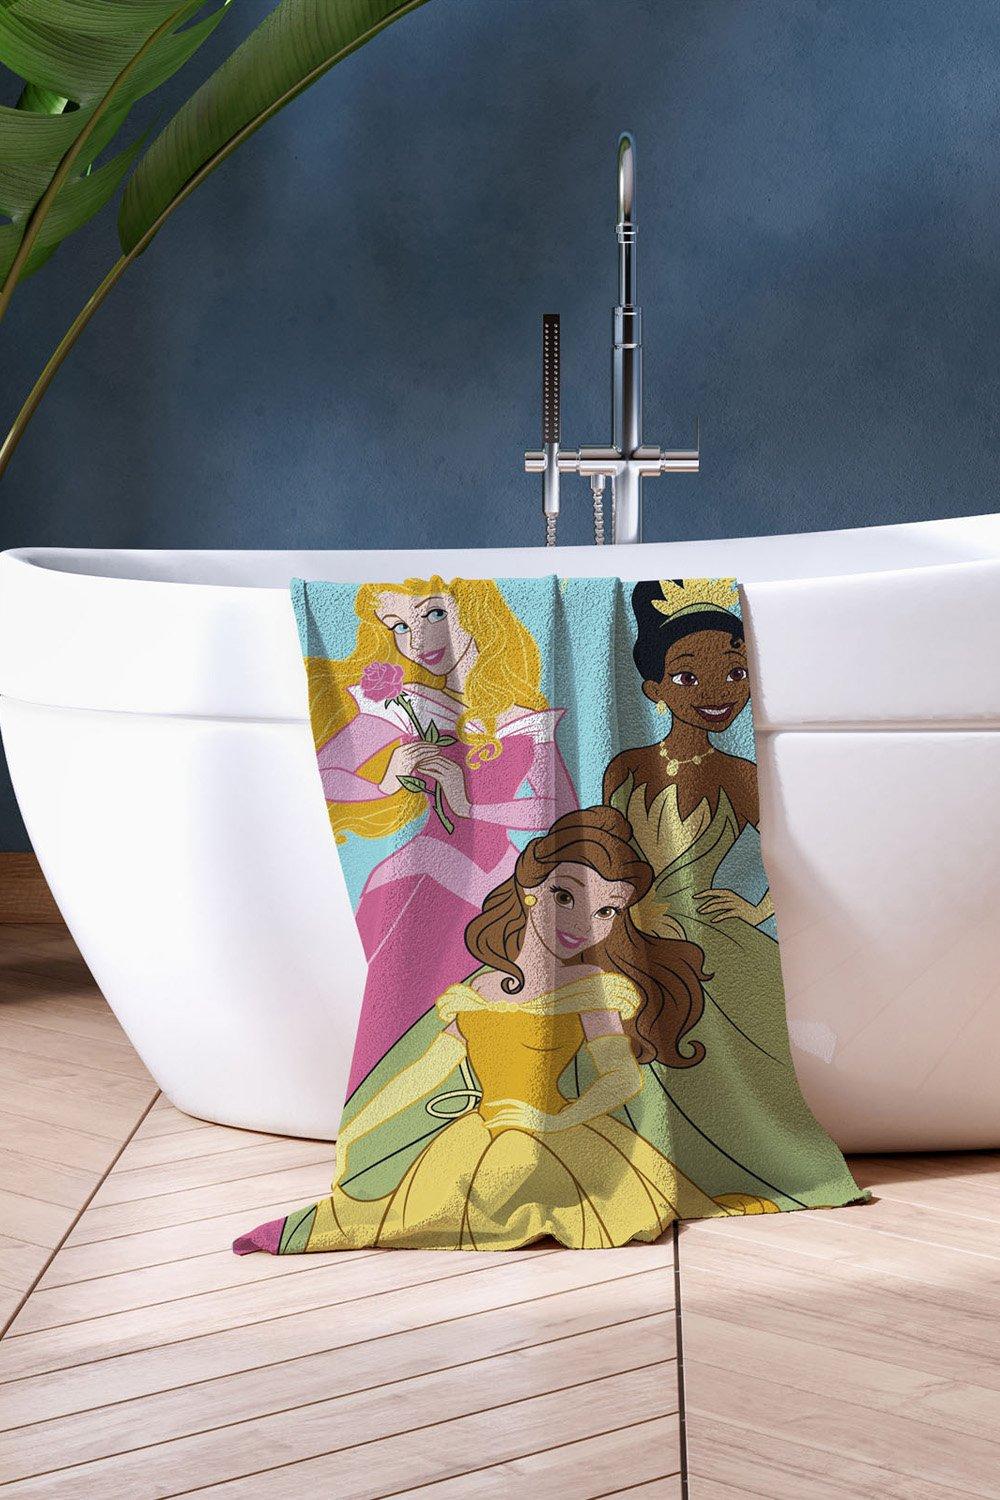 Disney Princess 100% Cotton Kitchen Towels, 2pk-Soft & Absorbent Decorative Kitchen Towels Perfect for Drying Dishes & Hands-Machine Washable